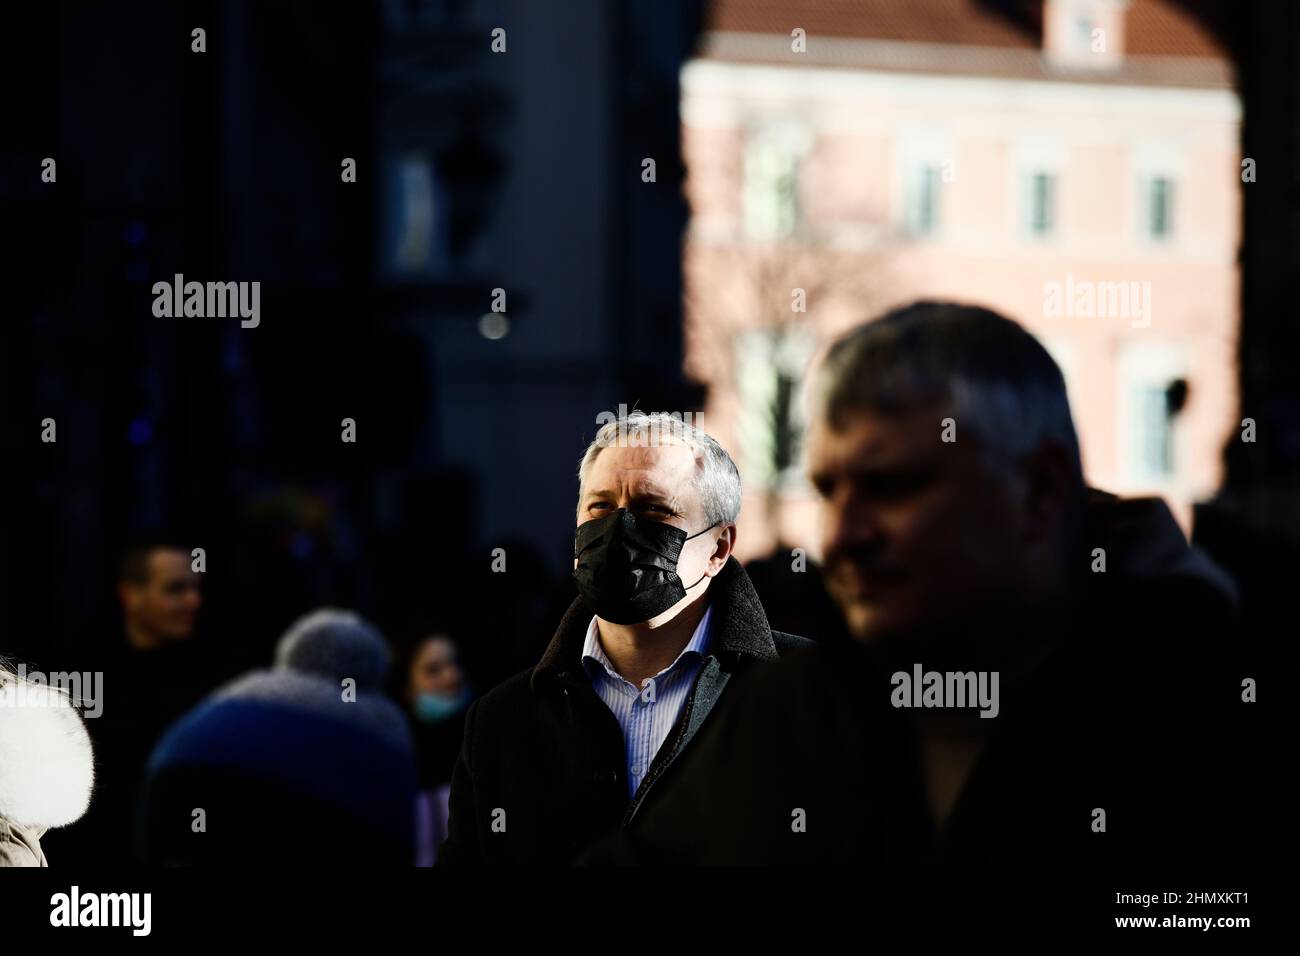 A man wearing a face mask is seen in the Old Town of Warsaw, Poland on 12 February, 2022. Minister of Health Adam Niedzielski this week announced the Stock Photo